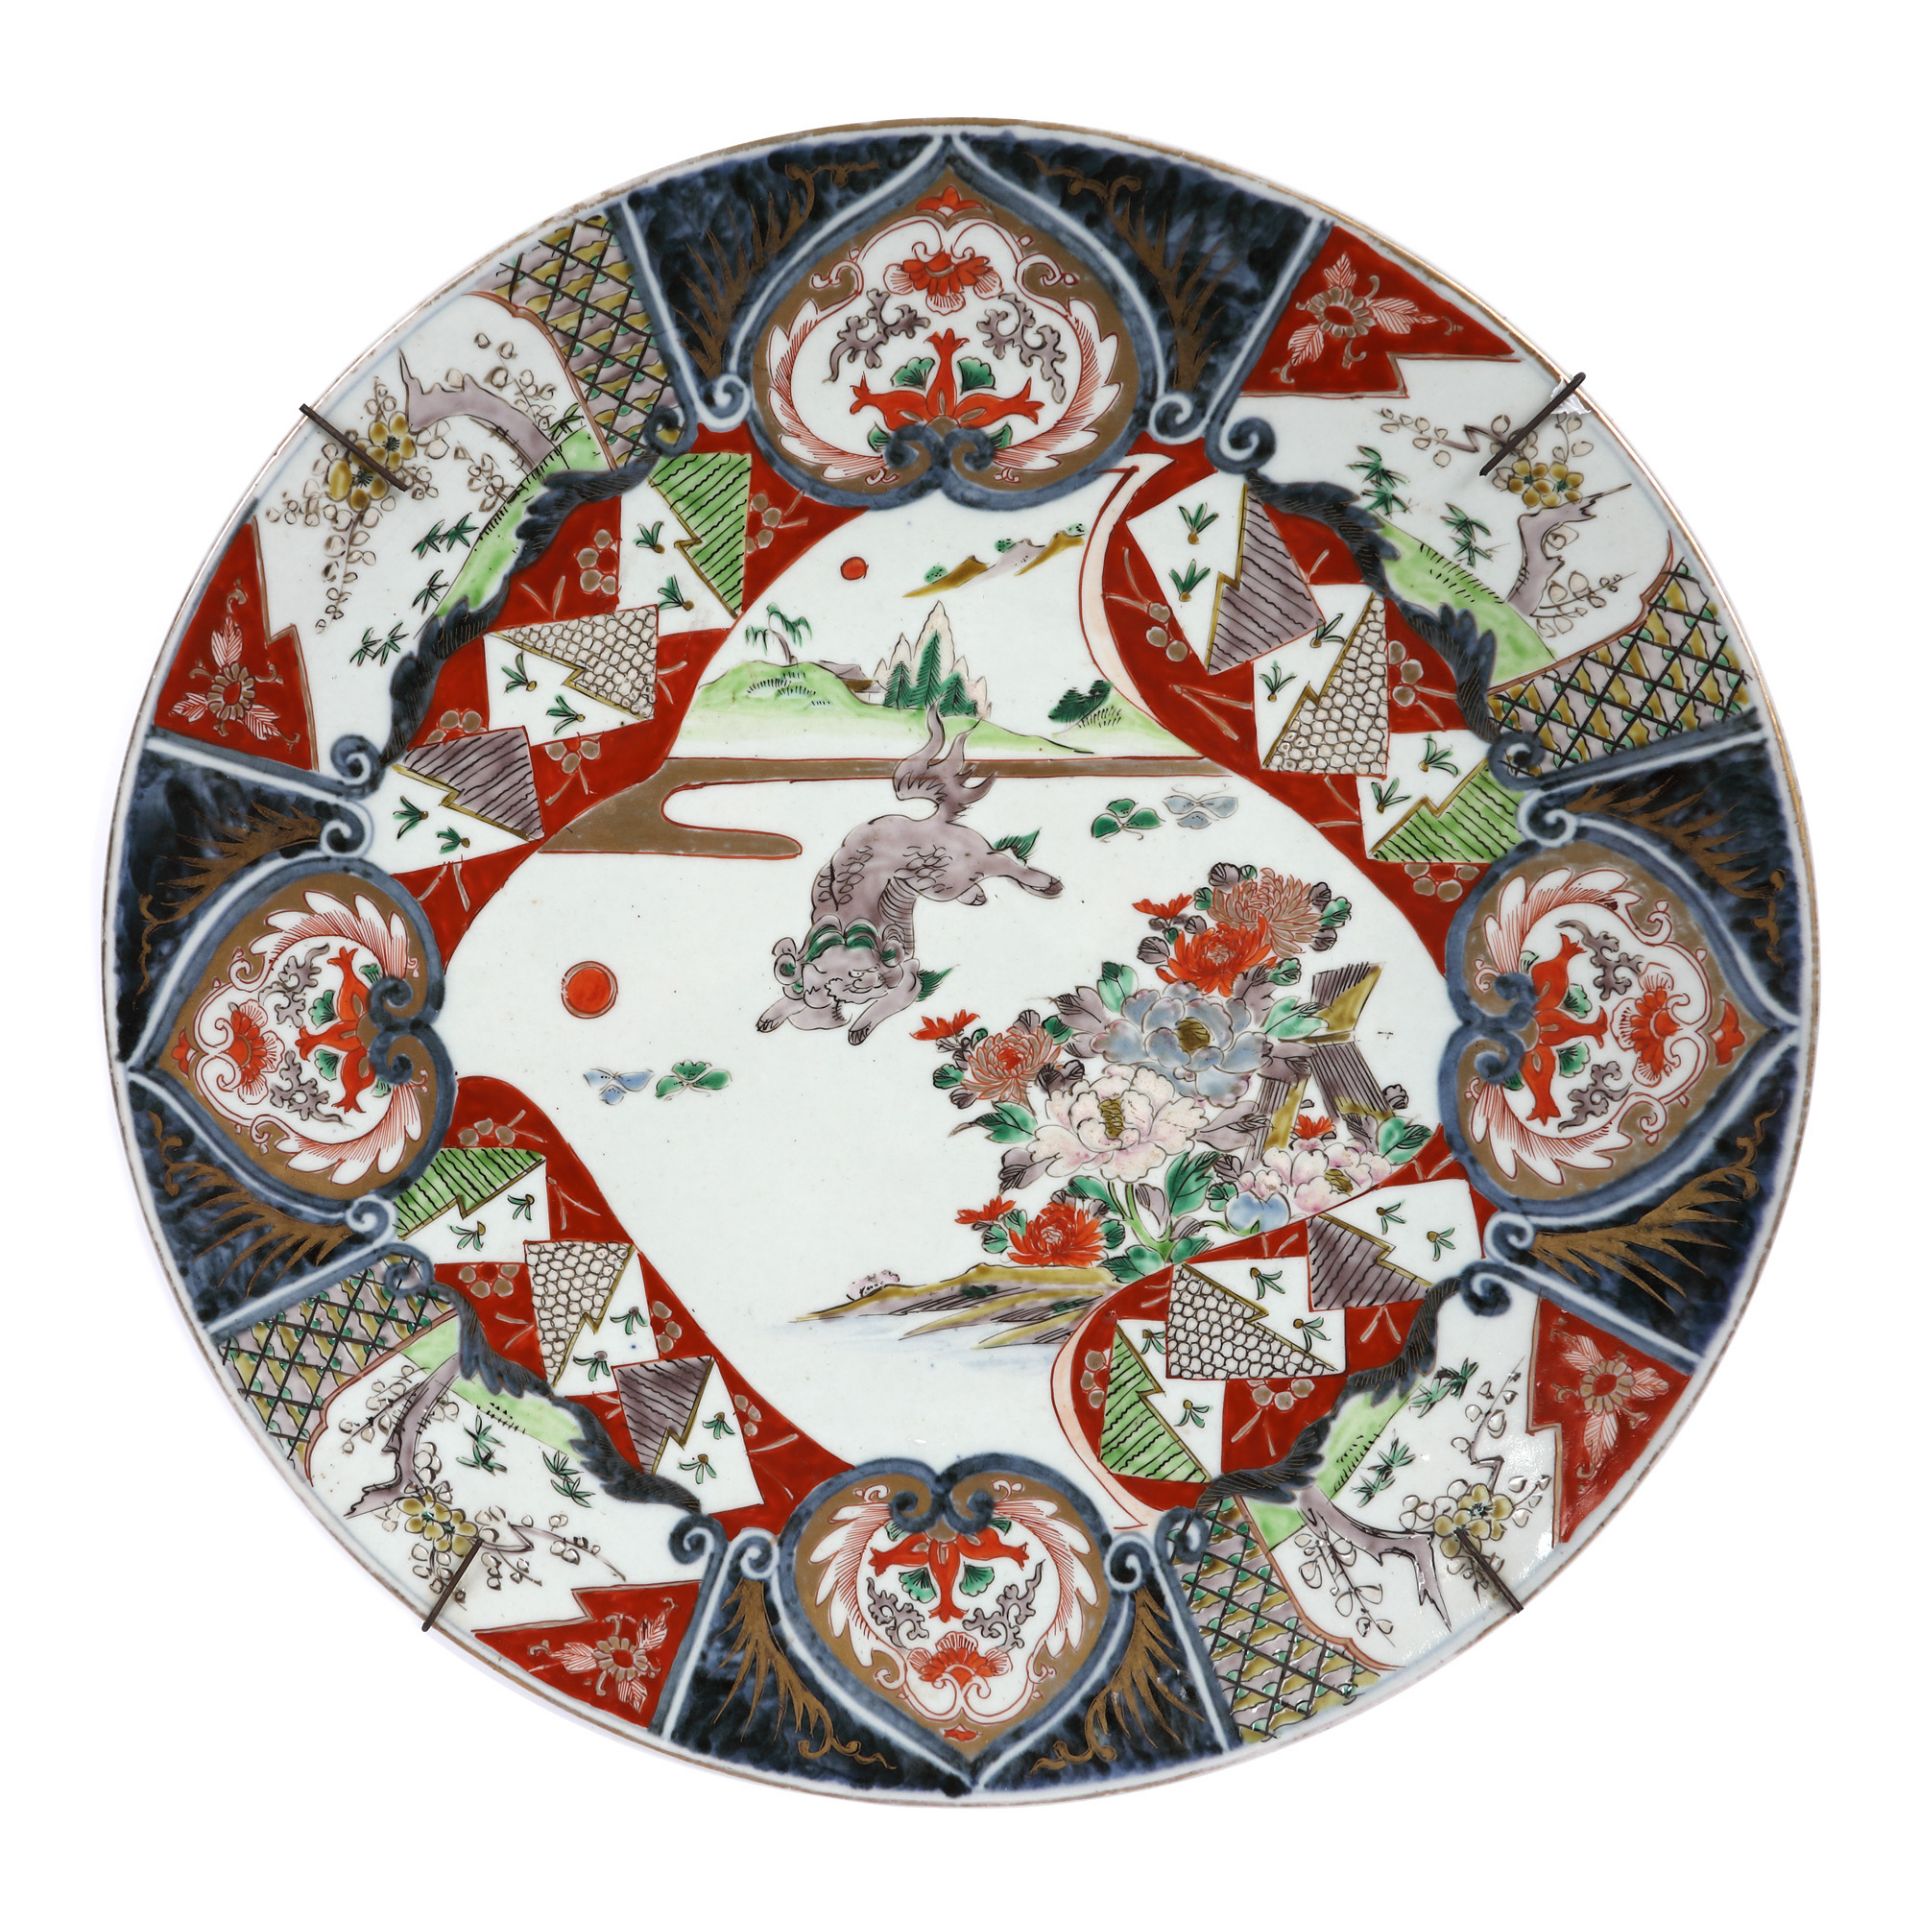 Porcelain plate, of impressive dimensions, decorated with Foo dogs and chrysanthemums, Qing dynasty